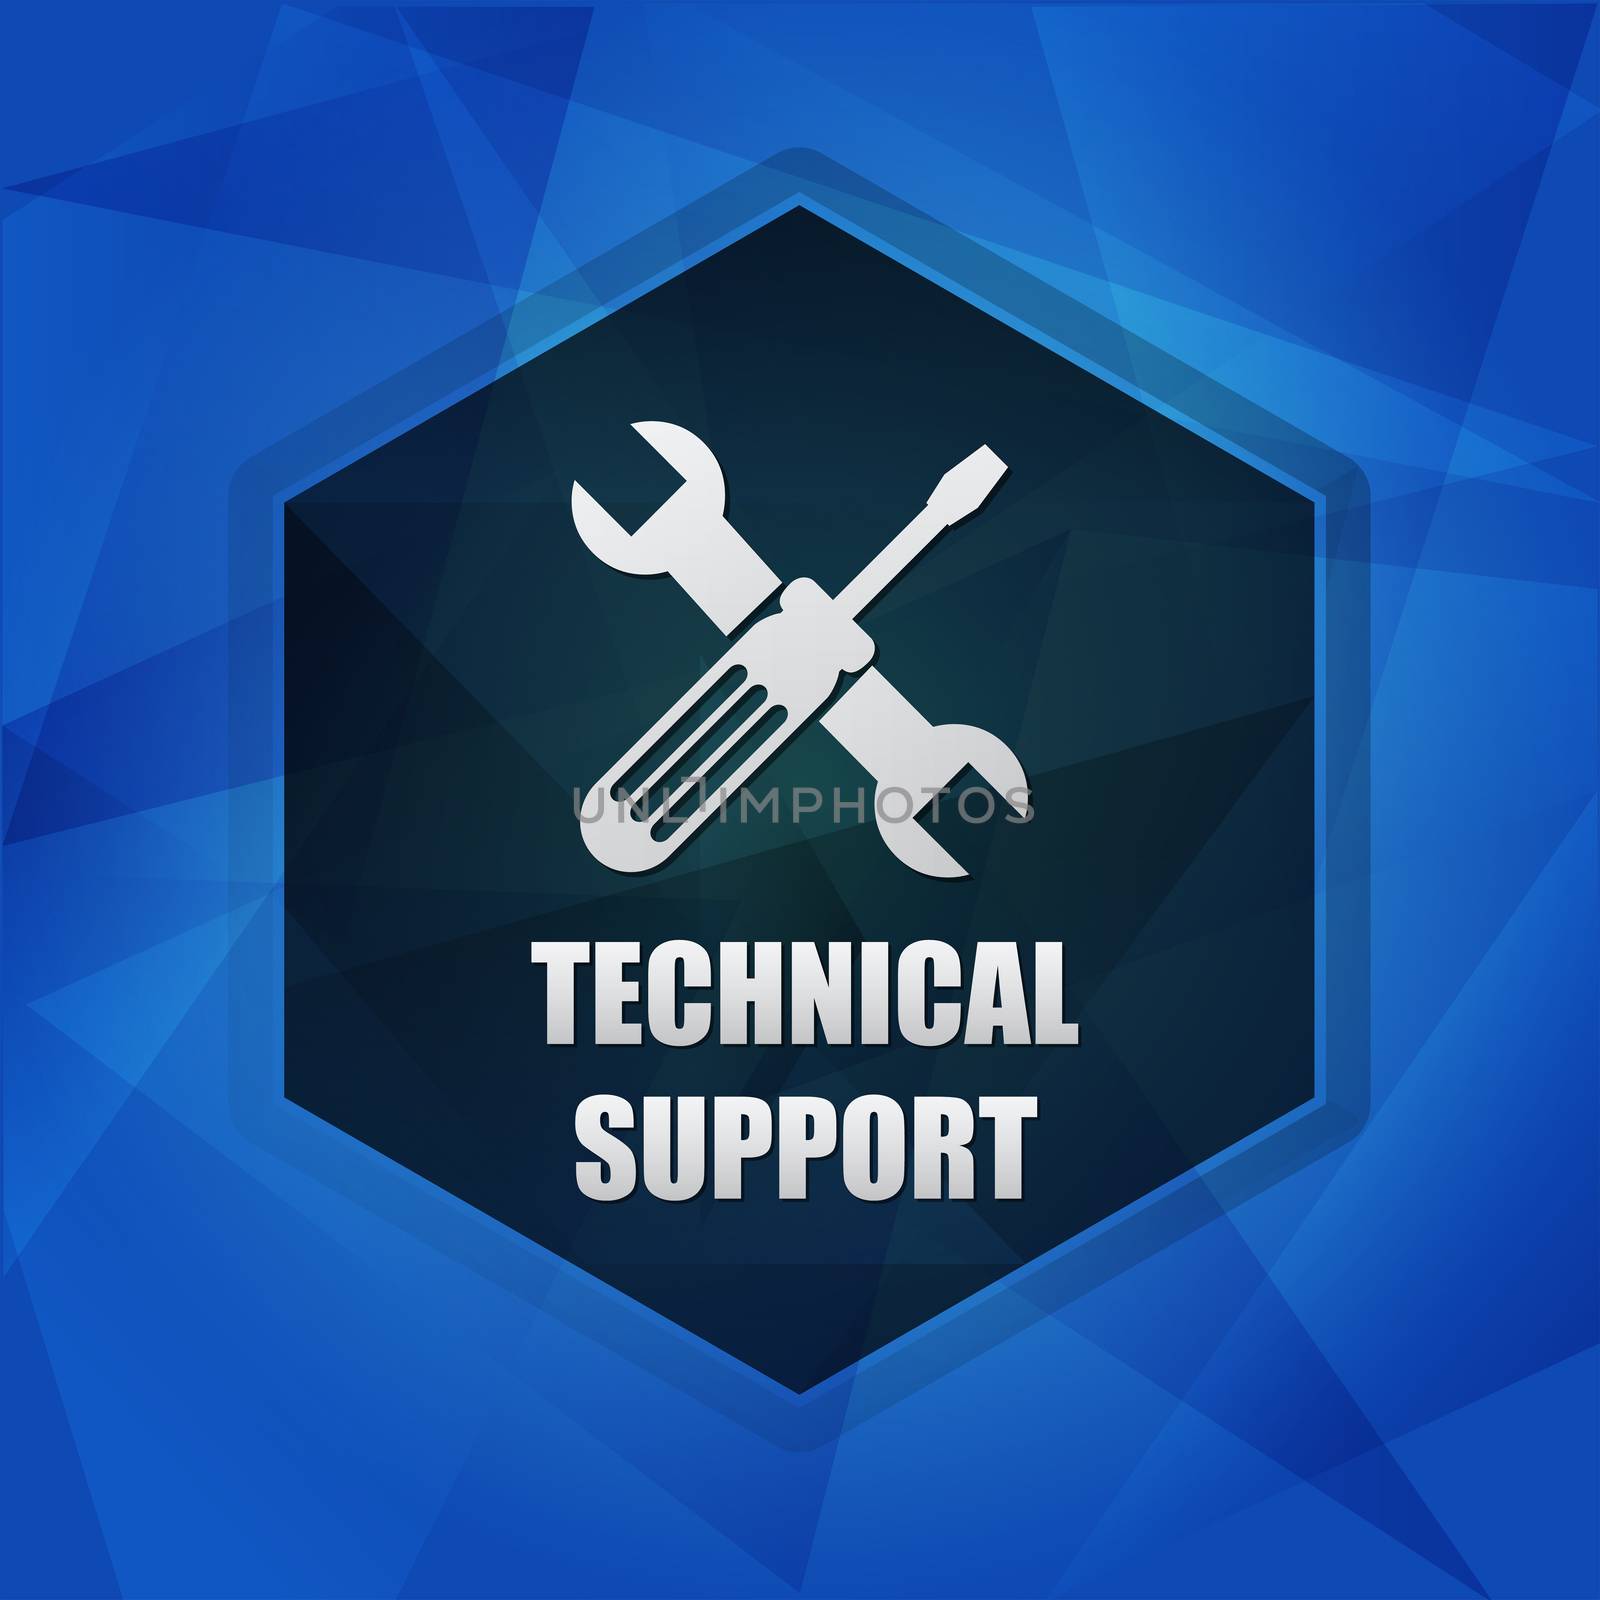 technical support with tools sign over blue background with flat design hexagons, web icon with symbol, business service concept